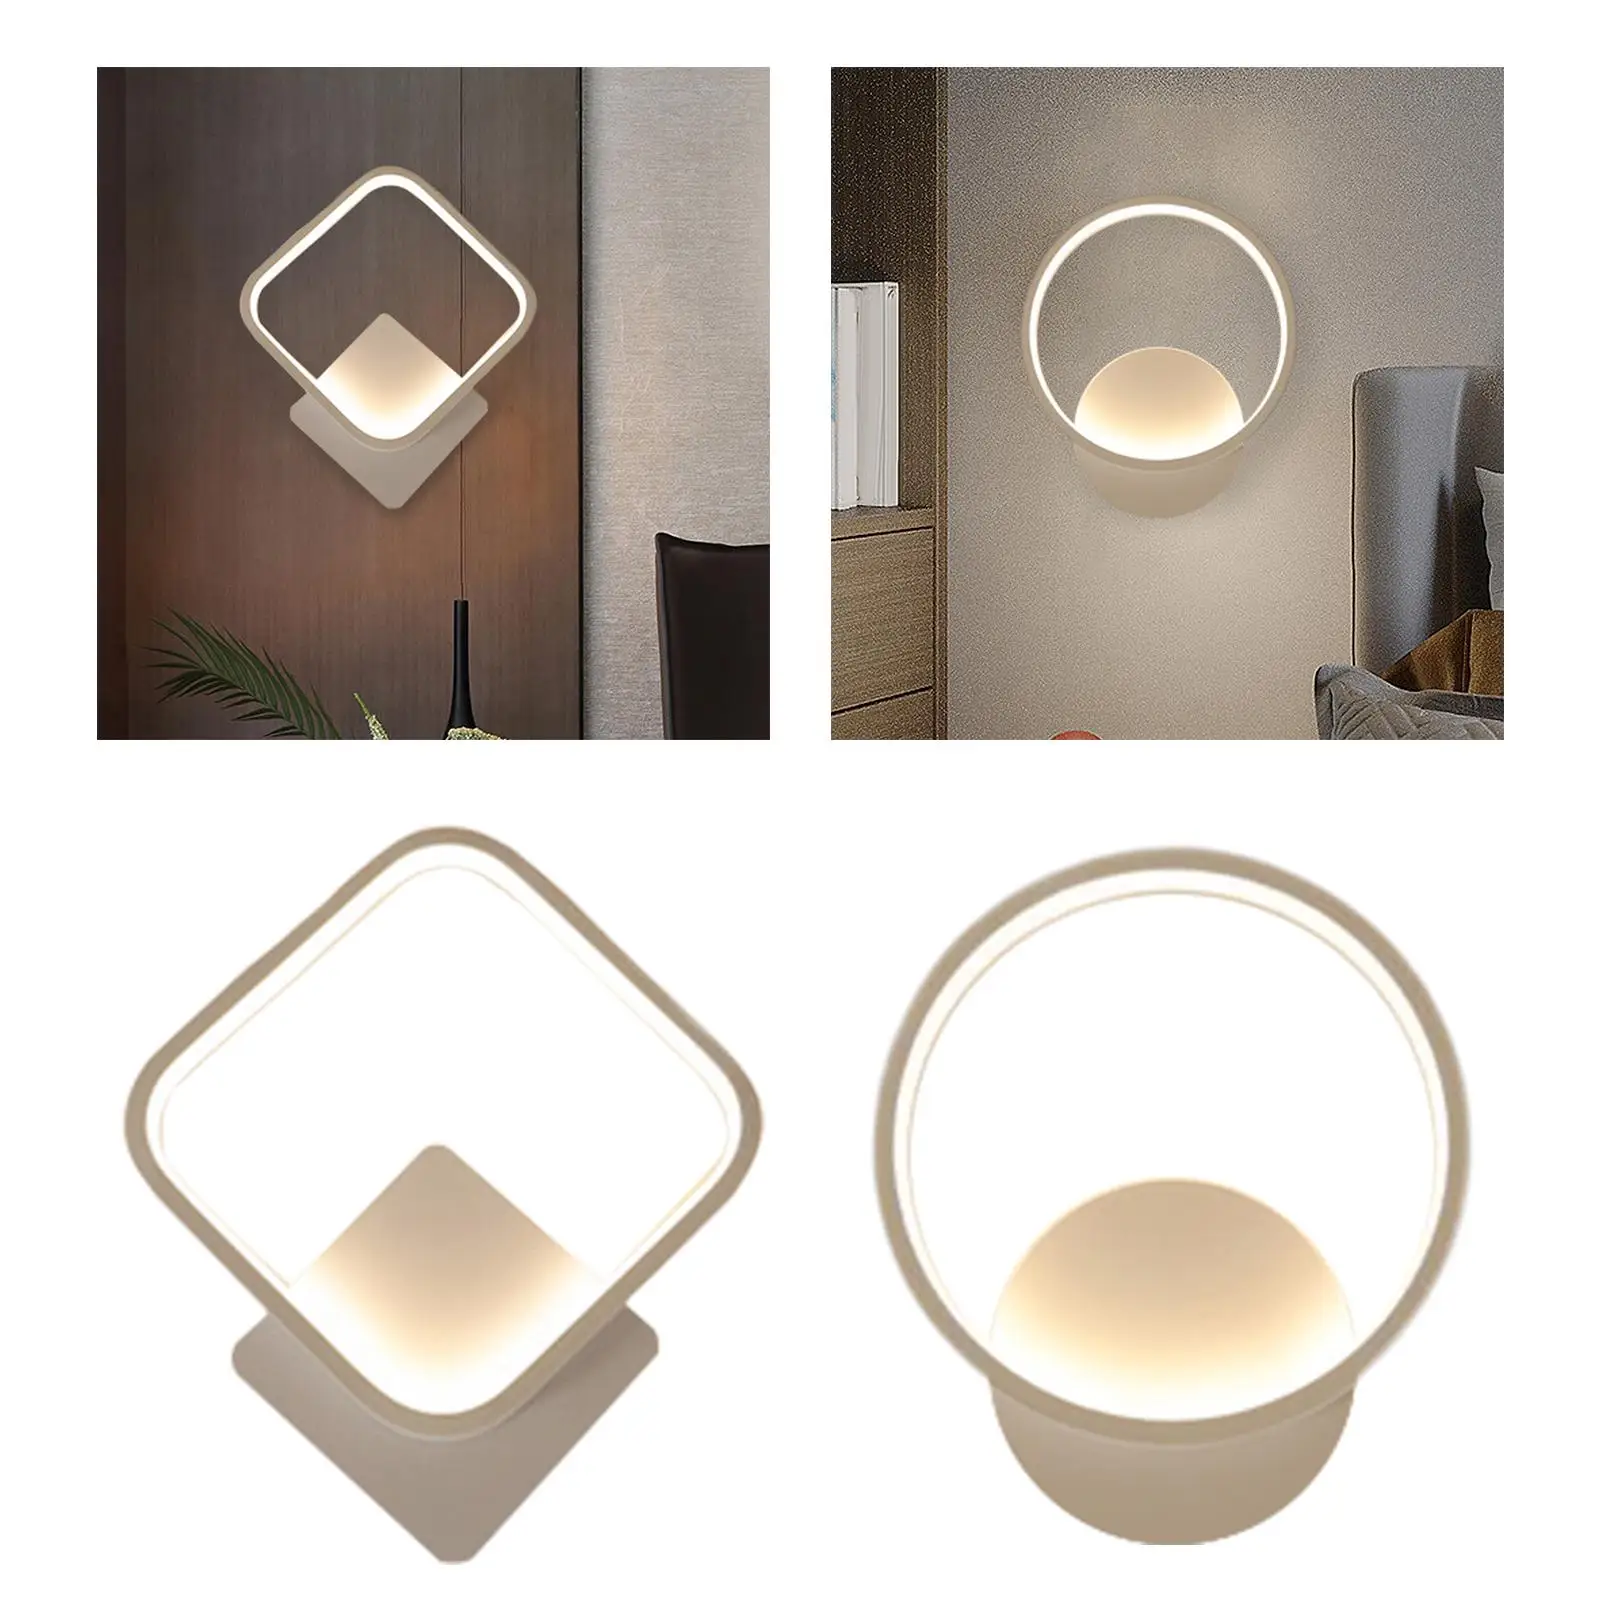 Wall Lamp Lighting Modern Simple Wall Sconce Wall Mount Light for Indoor Aisle Corridor Bedside Bedroom